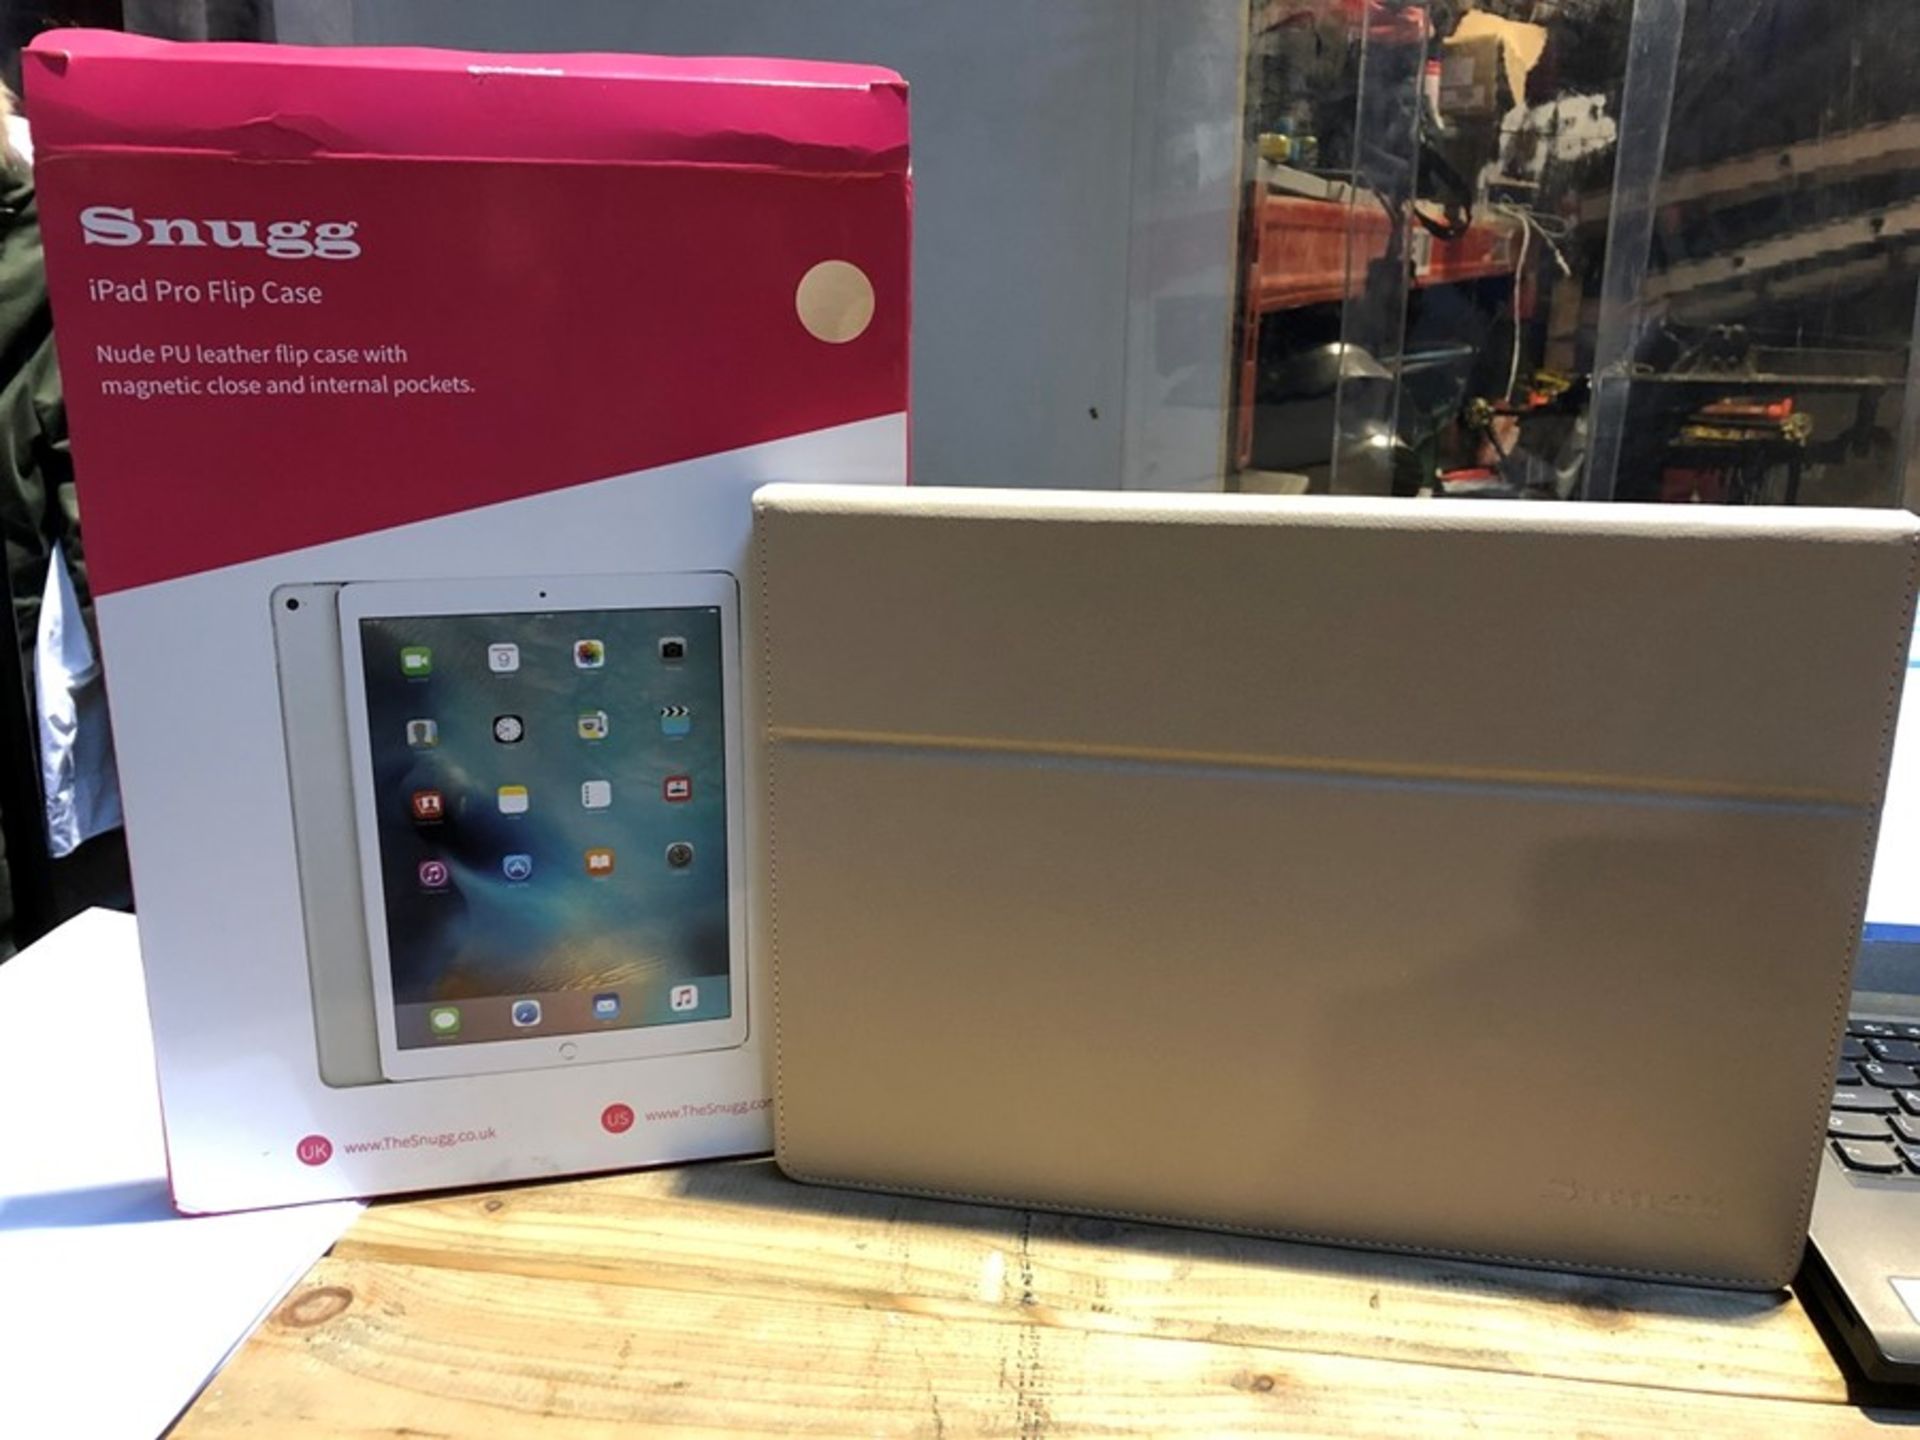 1 LOT TO CONTAIN 2 BOXED SNUGG IPAD PRO FLIP CASES 12.9 INCH IN BEIGE / RRP £49.98 (PUBLIC VIEWING